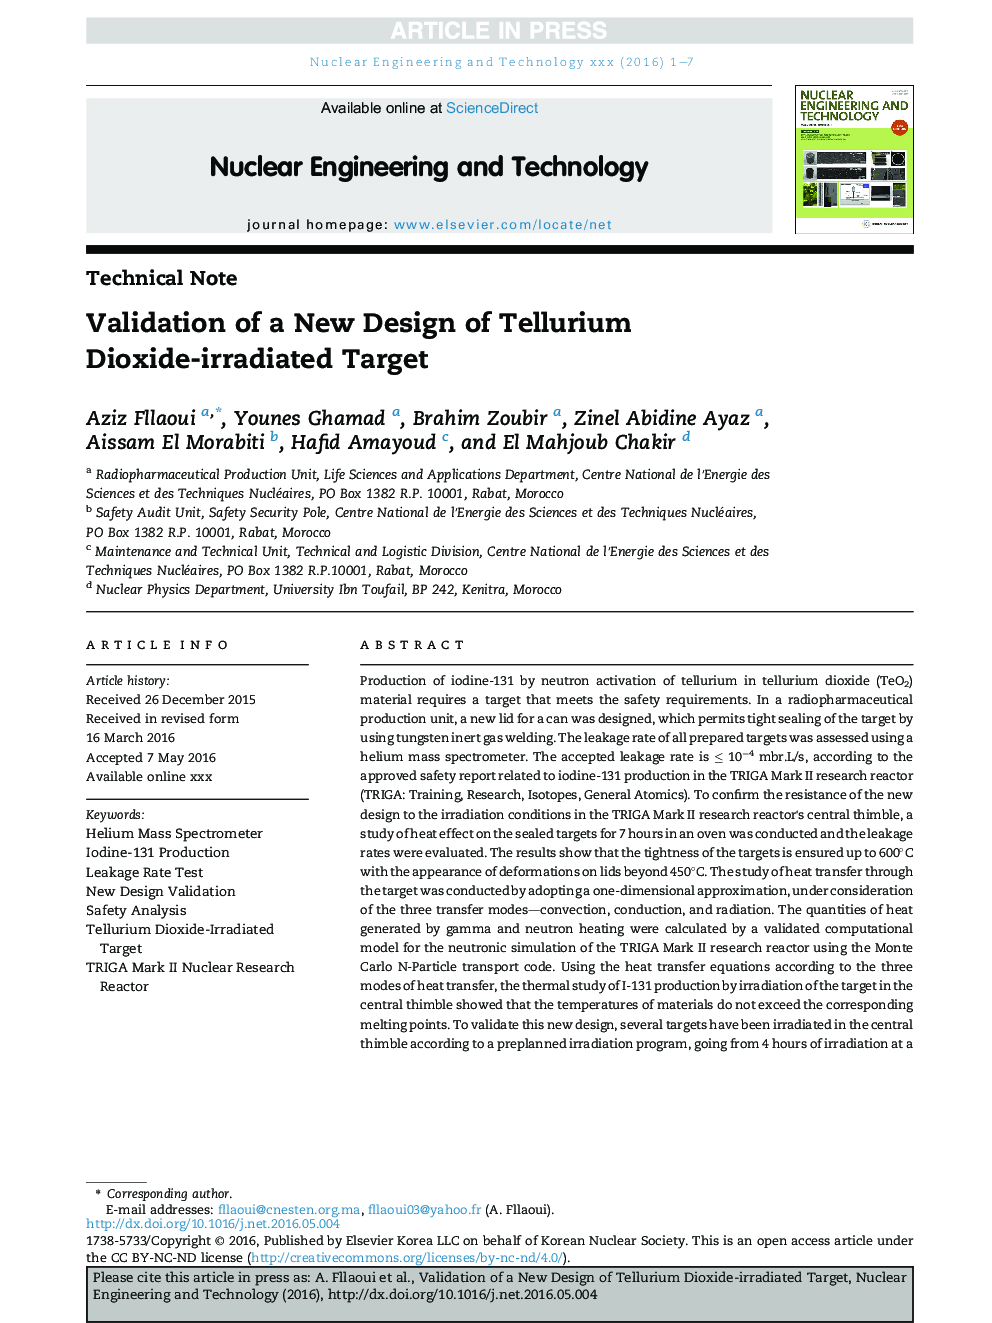 Validation of a New Design of Tellurium Dioxide-Irradiated Target